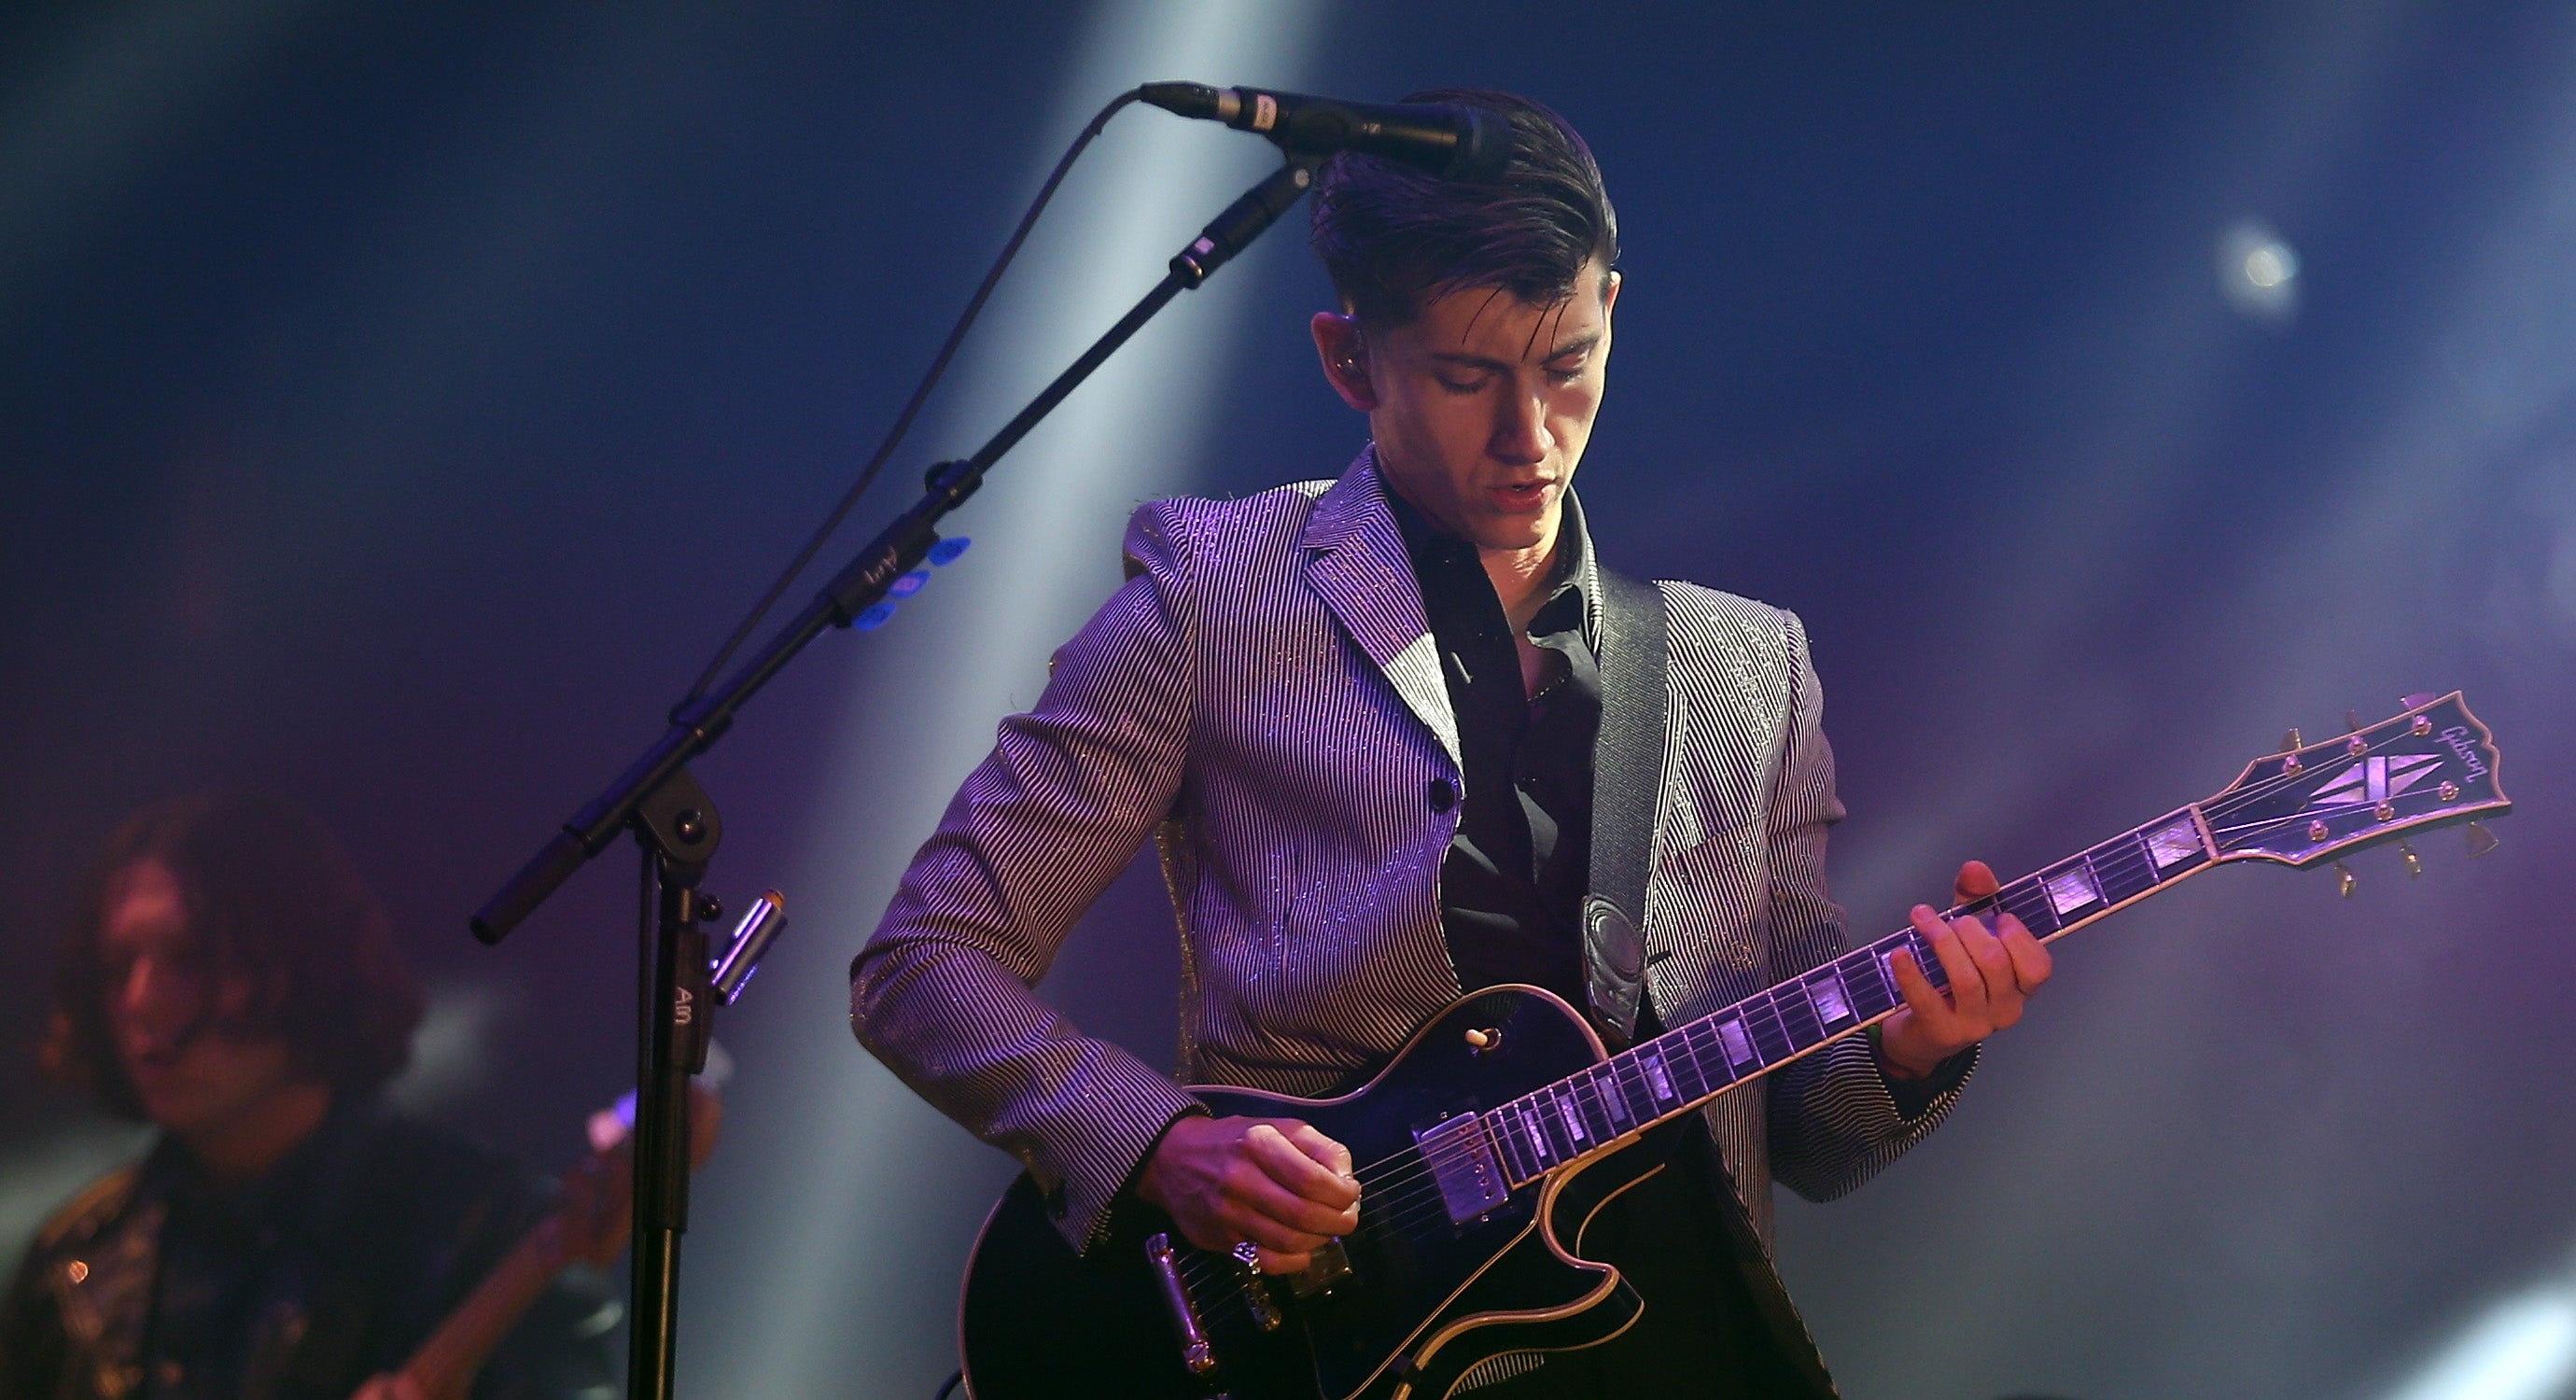 Arctic Monkeys also headlined in 2013, one decade ago